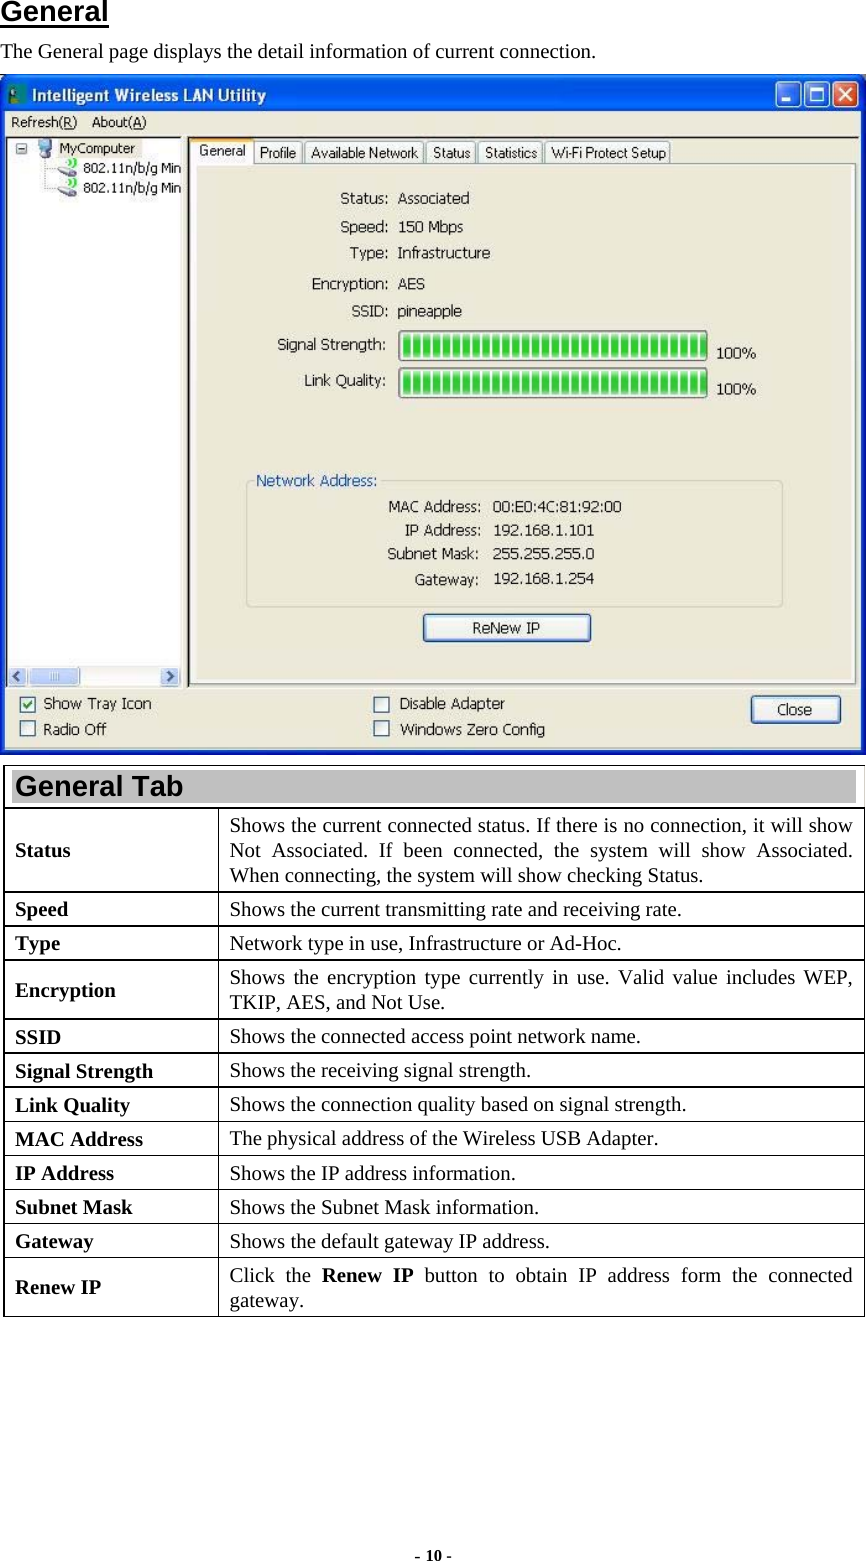  - 10 - General The General page displays the detail information of current connection.  General Tab Status  Shows the current connected status. If there is no connection, it will show Not Associated. If been connected, the system will show Associated. When connecting, the system will show checking Status. Speed  Shows the current transmitting rate and receiving rate. Type  Network type in use, Infrastructure or Ad-Hoc. Encryption  Shows the encryption type currently in use. Valid value includes WEP, TKIP, AES, and Not Use. SSID  Shows the connected access point network name. Signal Strength  Shows the receiving signal strength. Link Quality  Shows the connection quality based on signal strength. MAC Address  The physical address of the Wireless USB Adapter. IP Address  Shows the IP address information. Subnet Mask  Shows the Subnet Mask information. Gateway  Shows the default gateway IP address. Renew IP  Click the Renew IP button to obtain IP address form the connected gateway. 